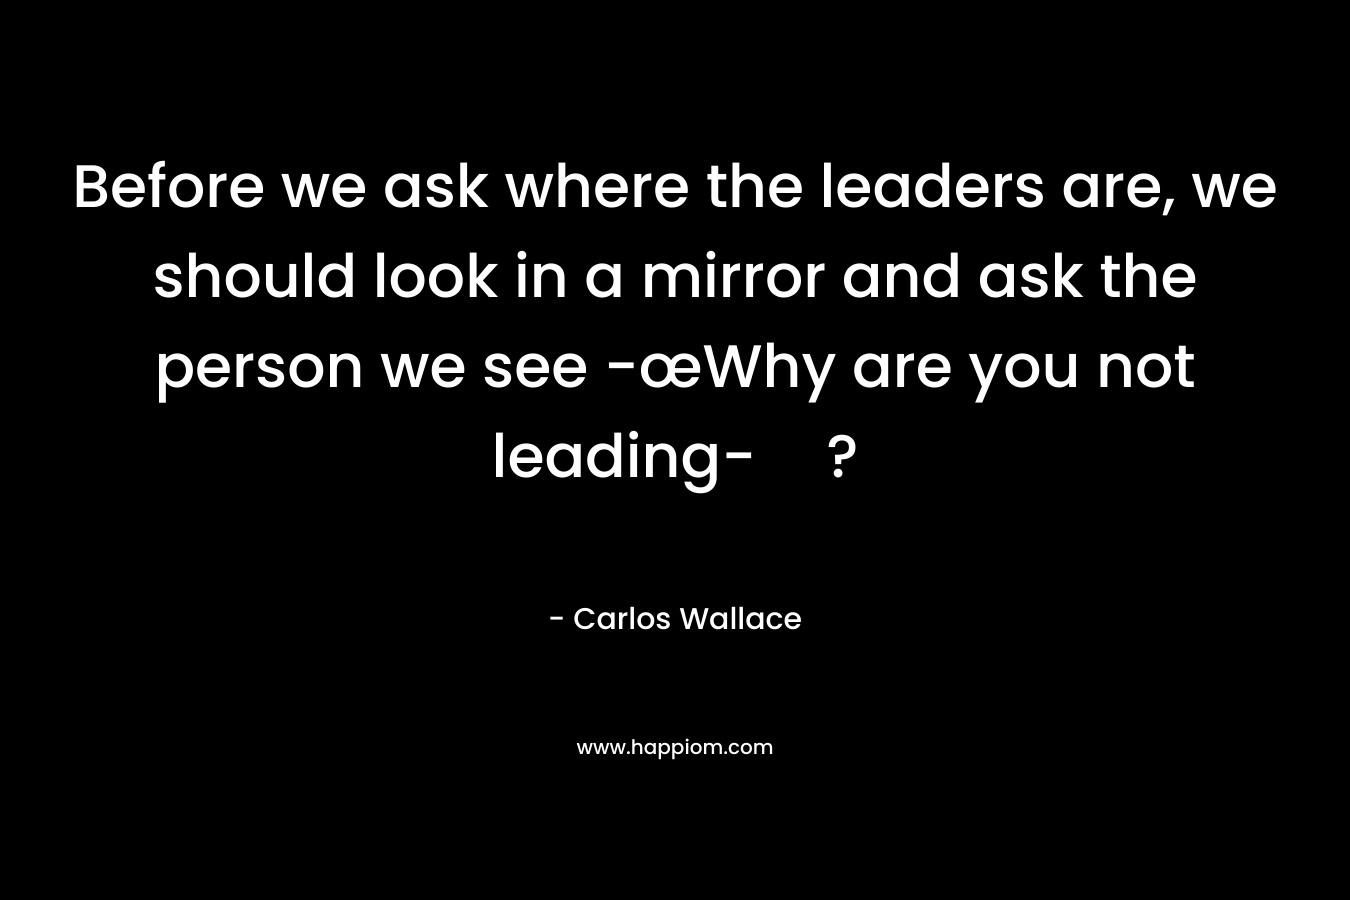 Before we ask where the leaders are, we should look in a mirror and ask the person we see -œWhy are you not leading-? – Carlos Wallace